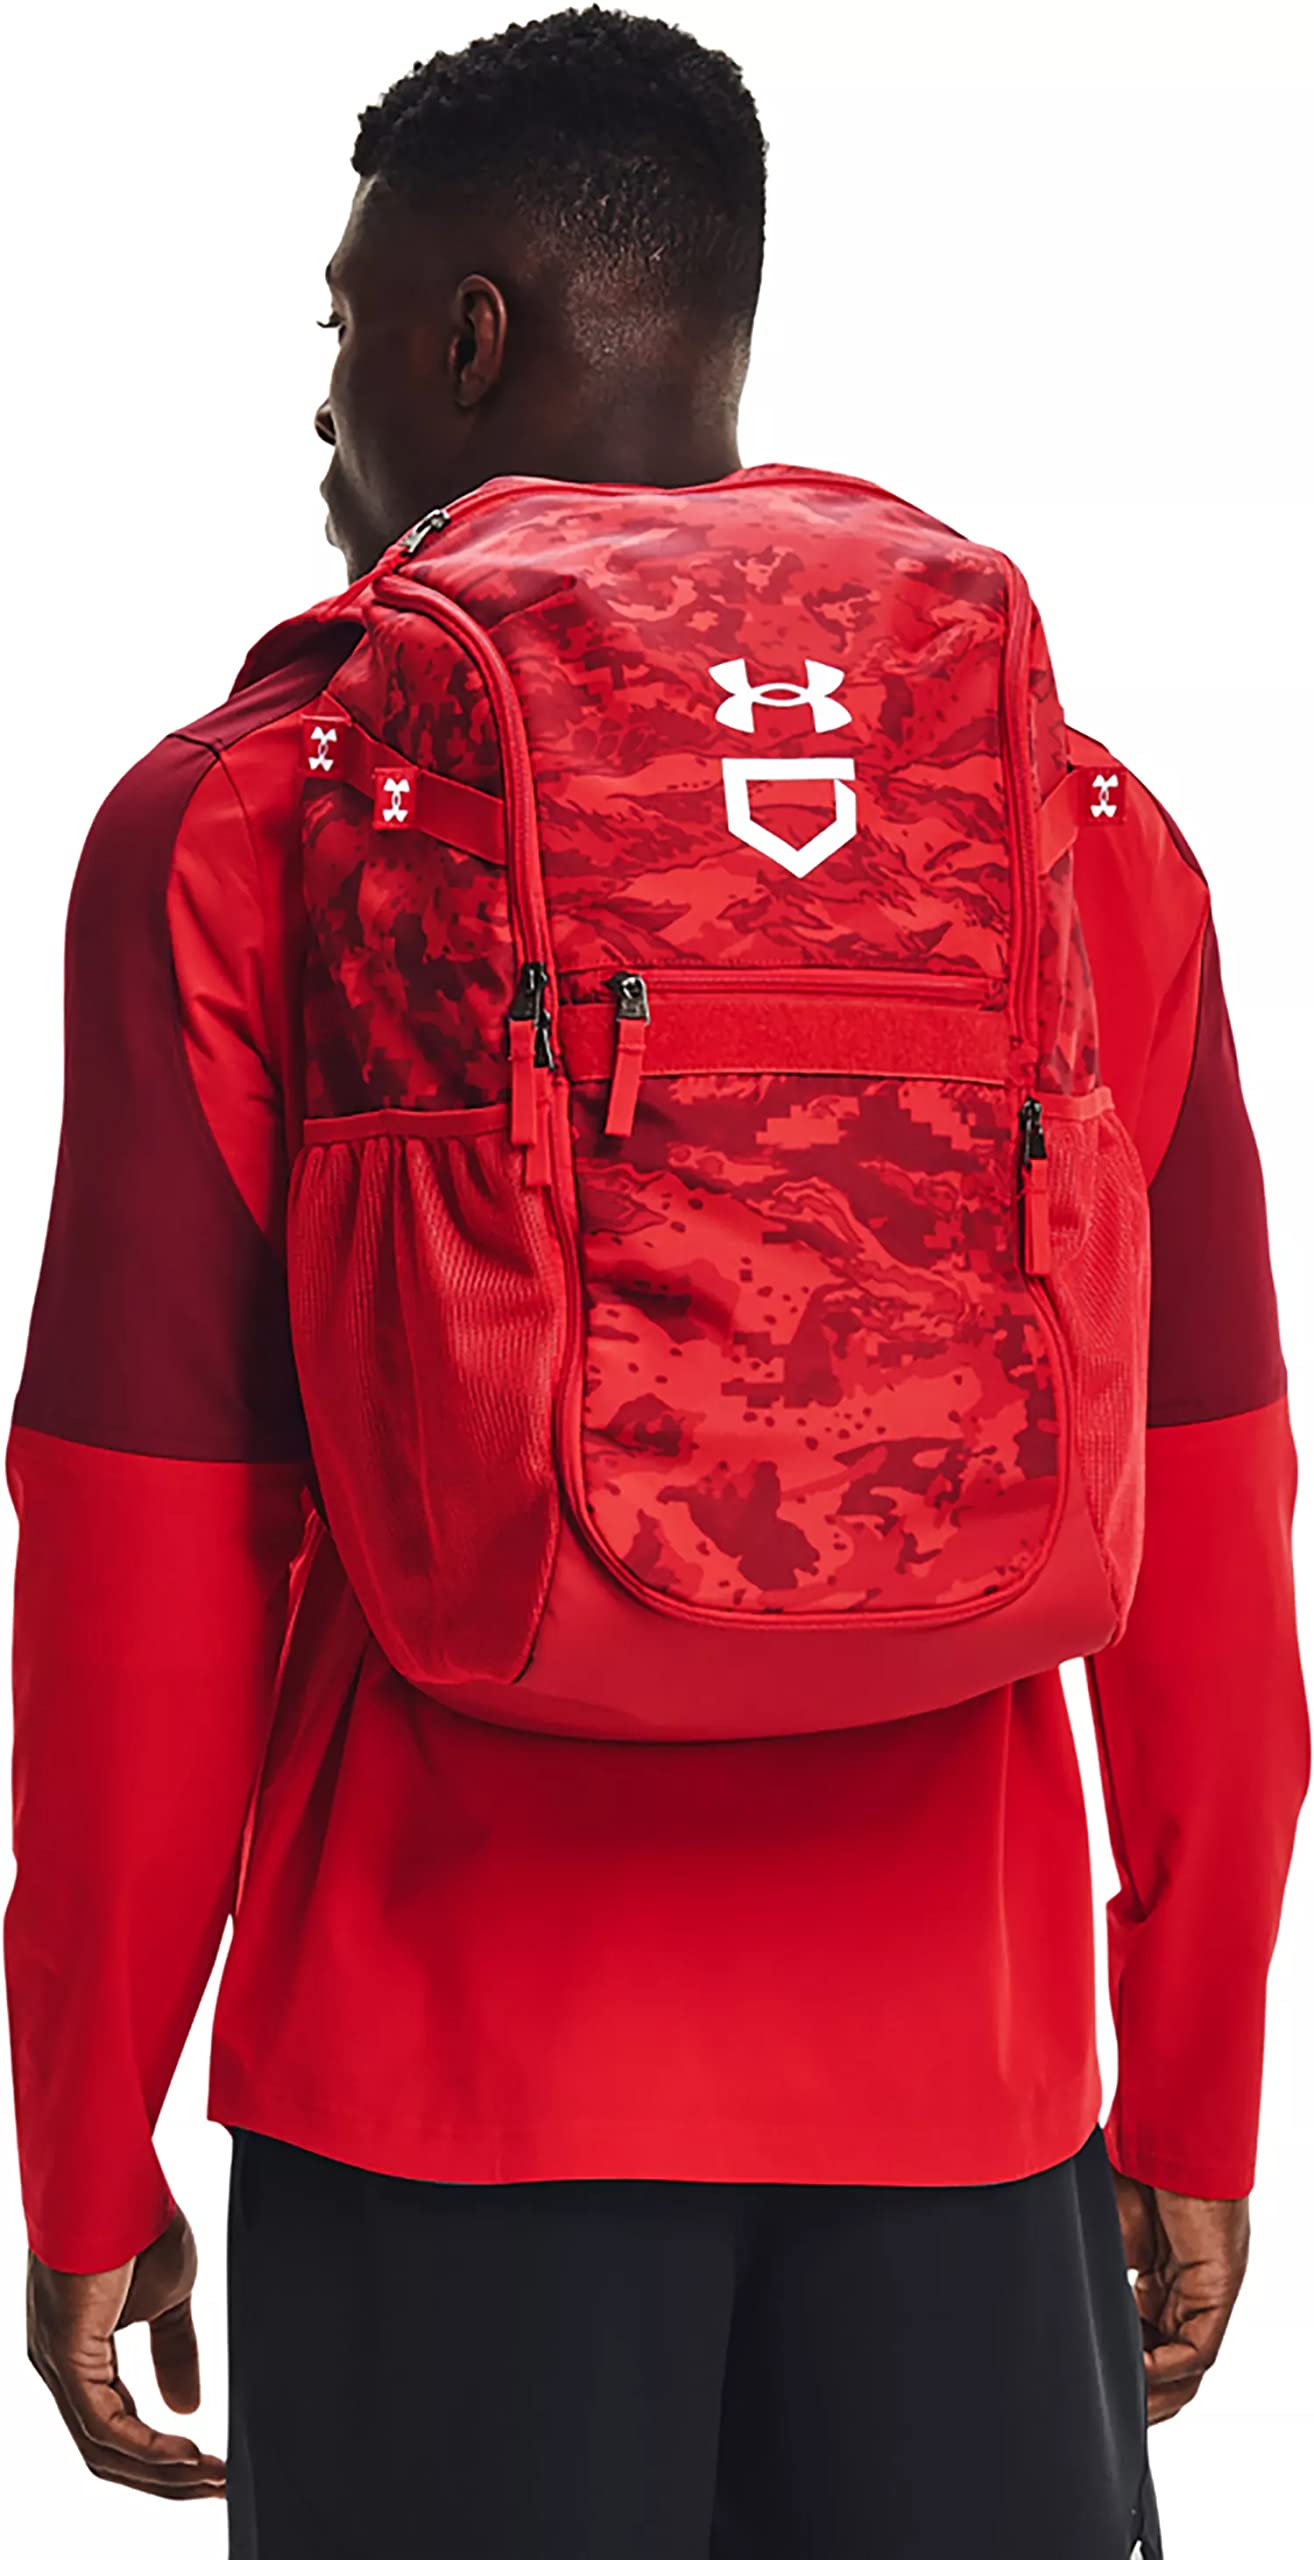 Under Armour Utility Baseball Backpack Print, (602) Red / / White, One Size Fits All